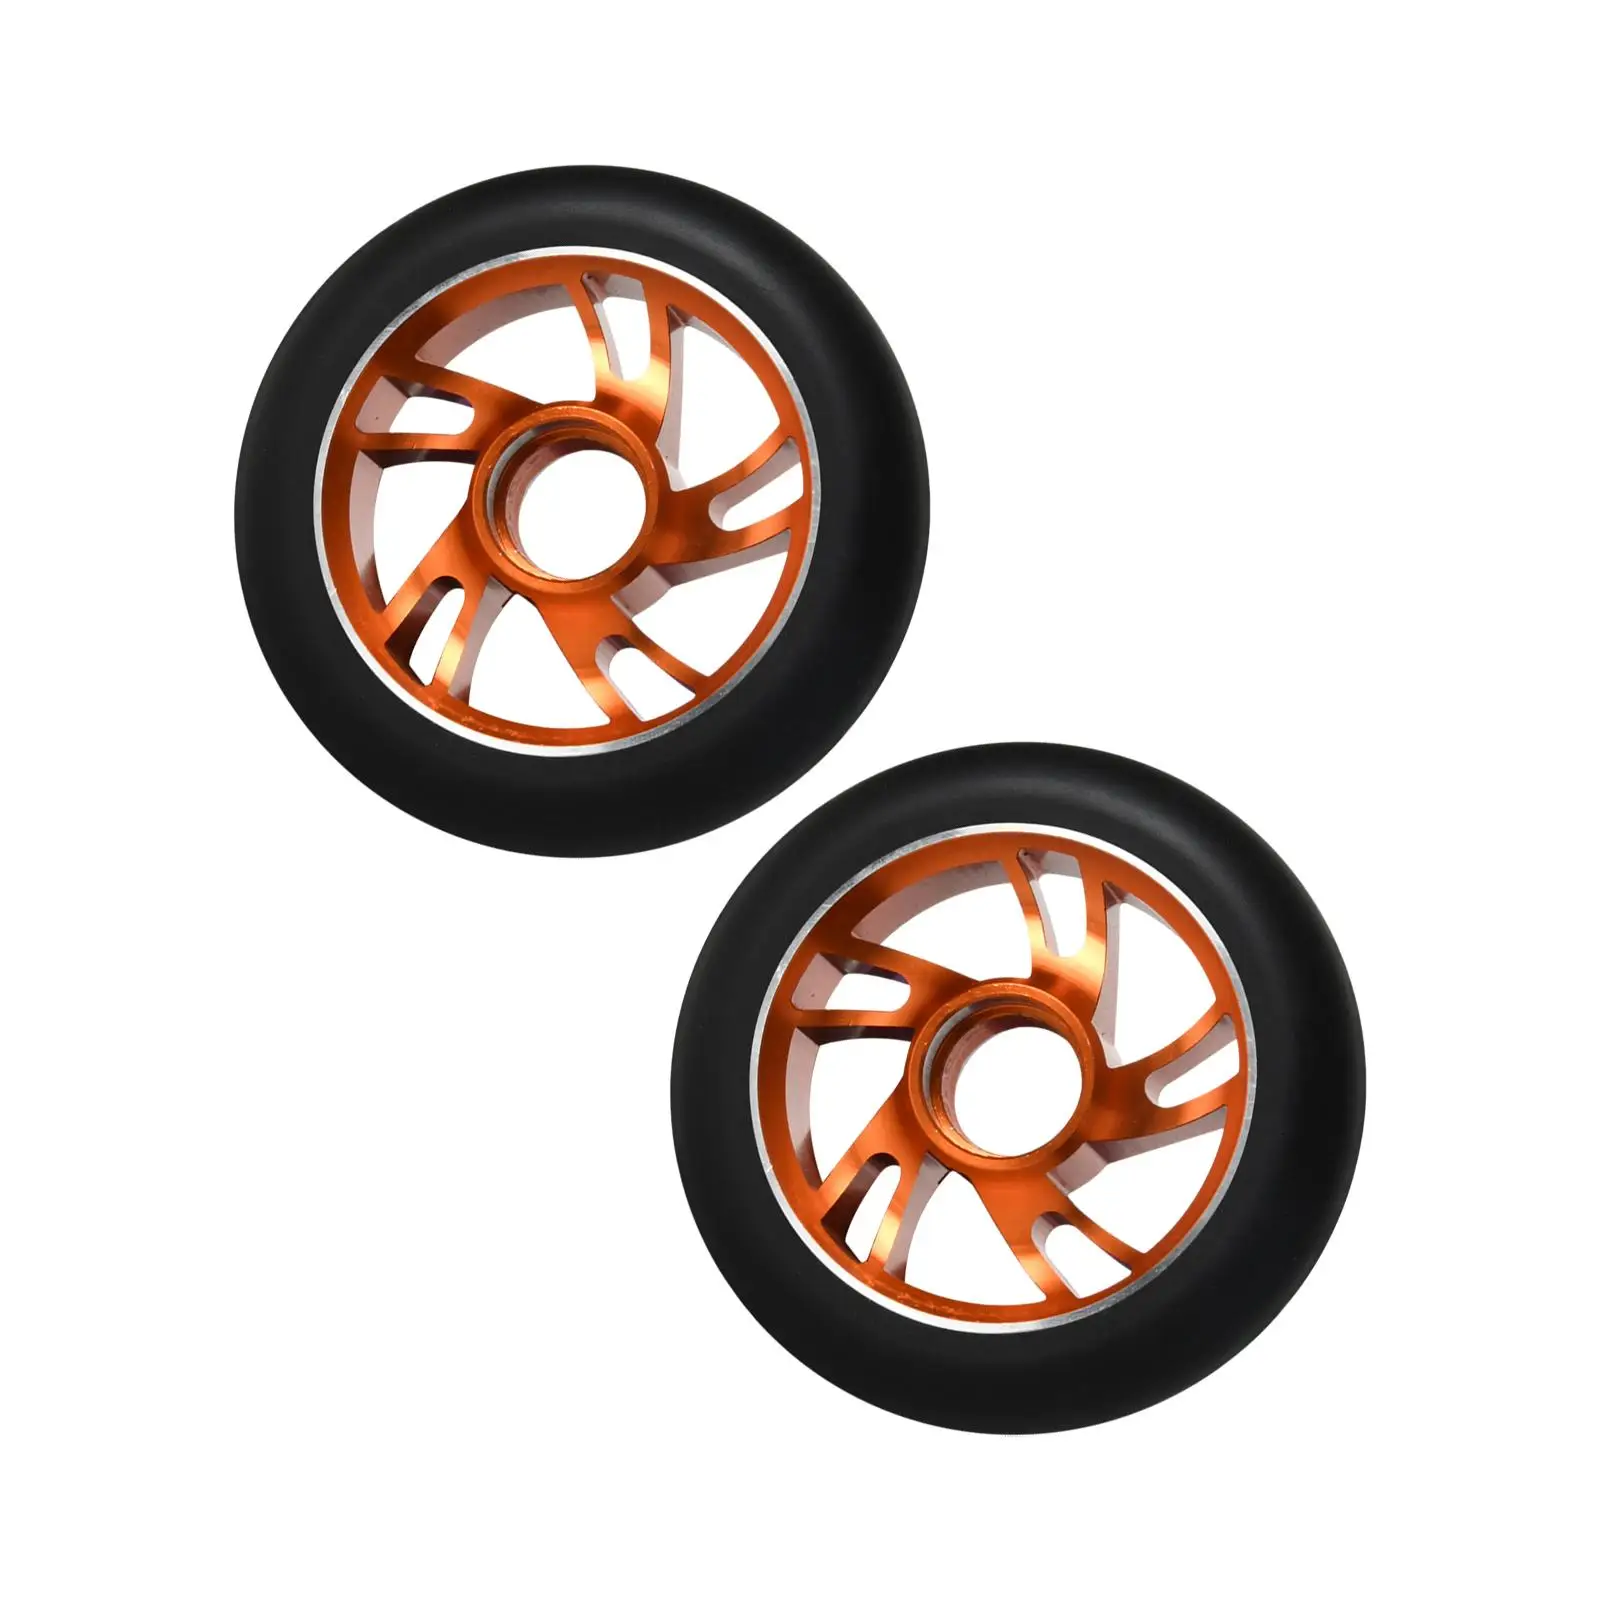 2x Scooter Wheels Spare Parts Aluminium Alloy 100mm for Scooter Accessories